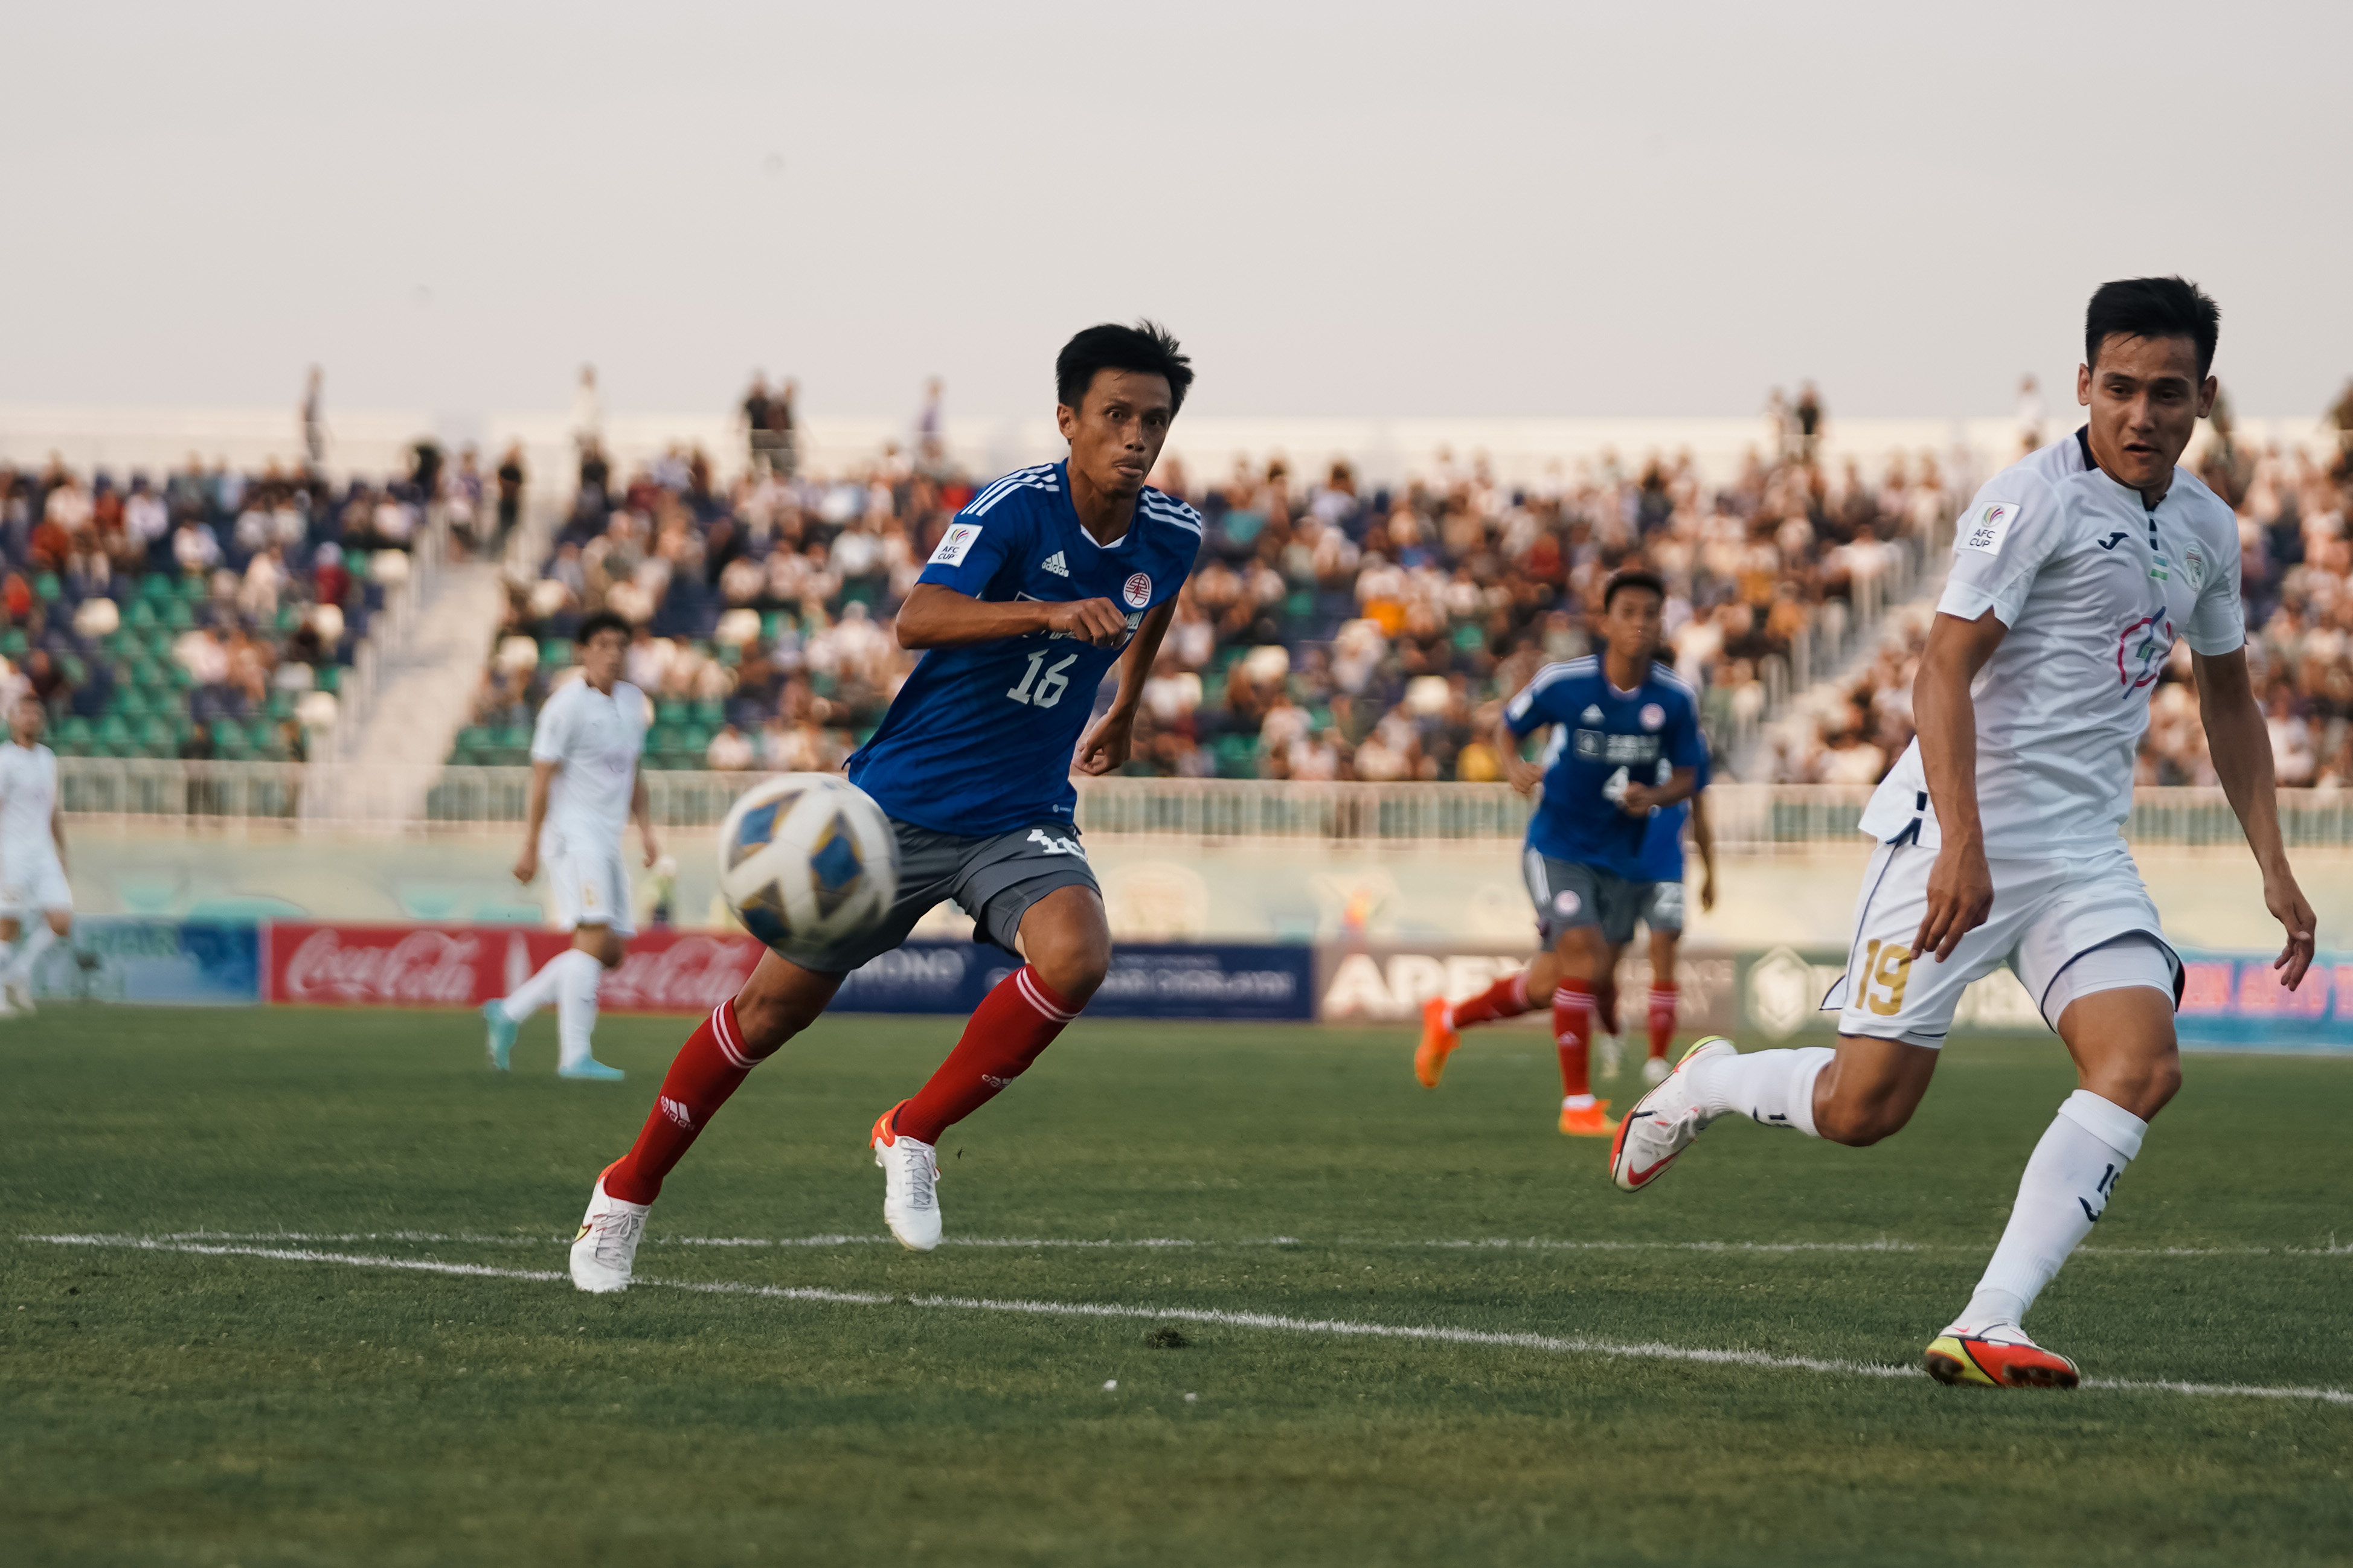 Eastern Long Lions midfielder Leung Chun-pong (left) gives chase as PFC Sogdiana striker Javokhir Kakhramonov waits to get the ball during the first half of the AFC Cup inter-zone semi-final. Photo: Eastern SC 